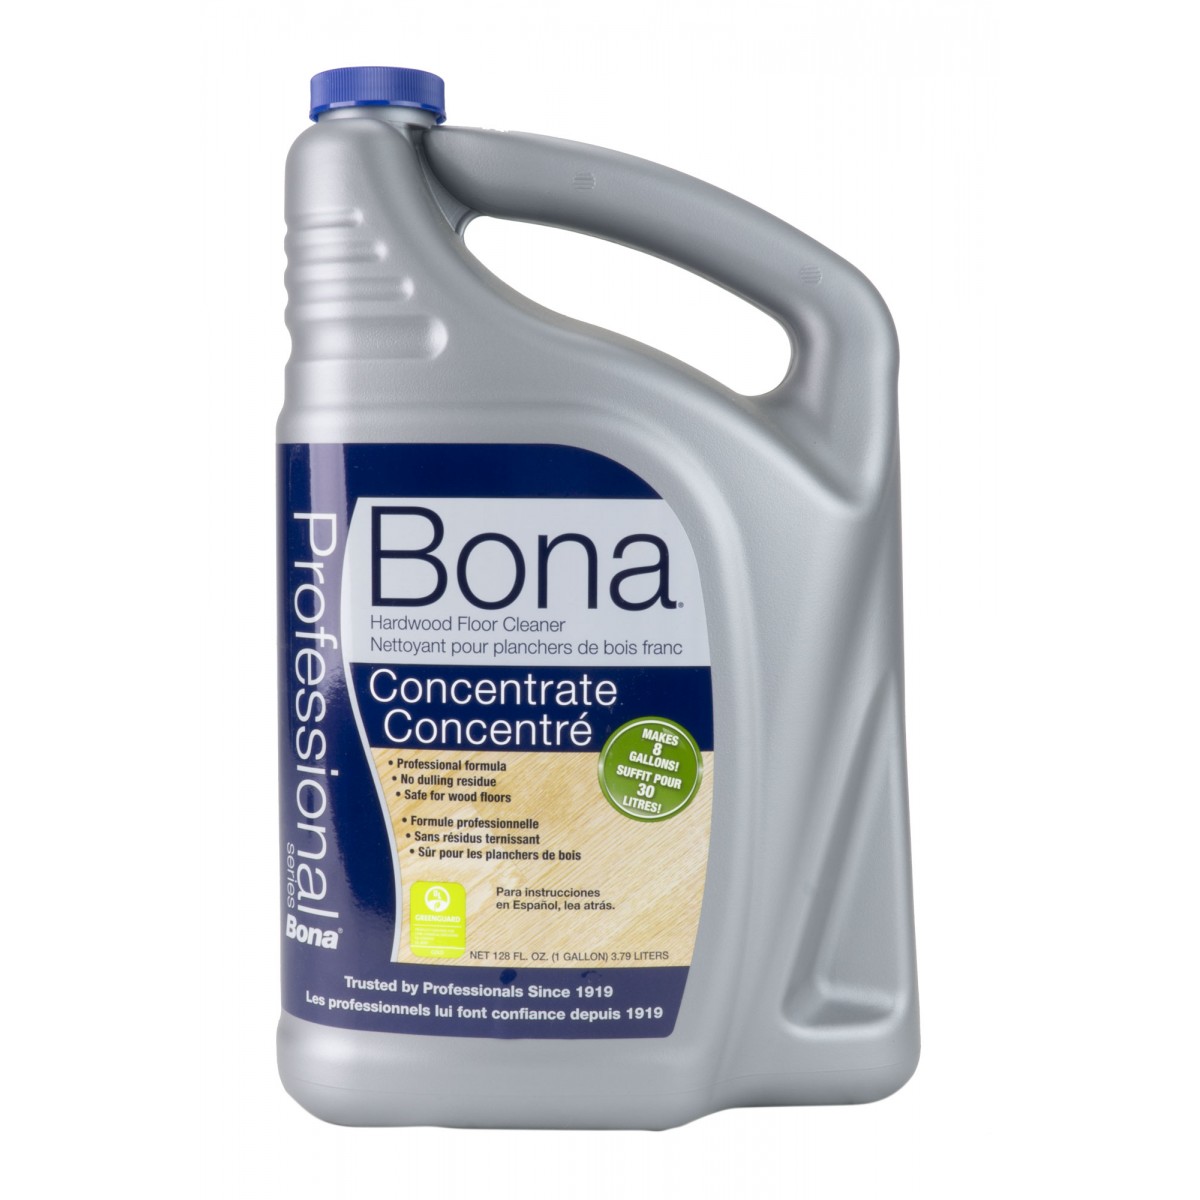 Concentrated Hardwood Floors Cleaner, Bona Hardwood Floor Concentrate